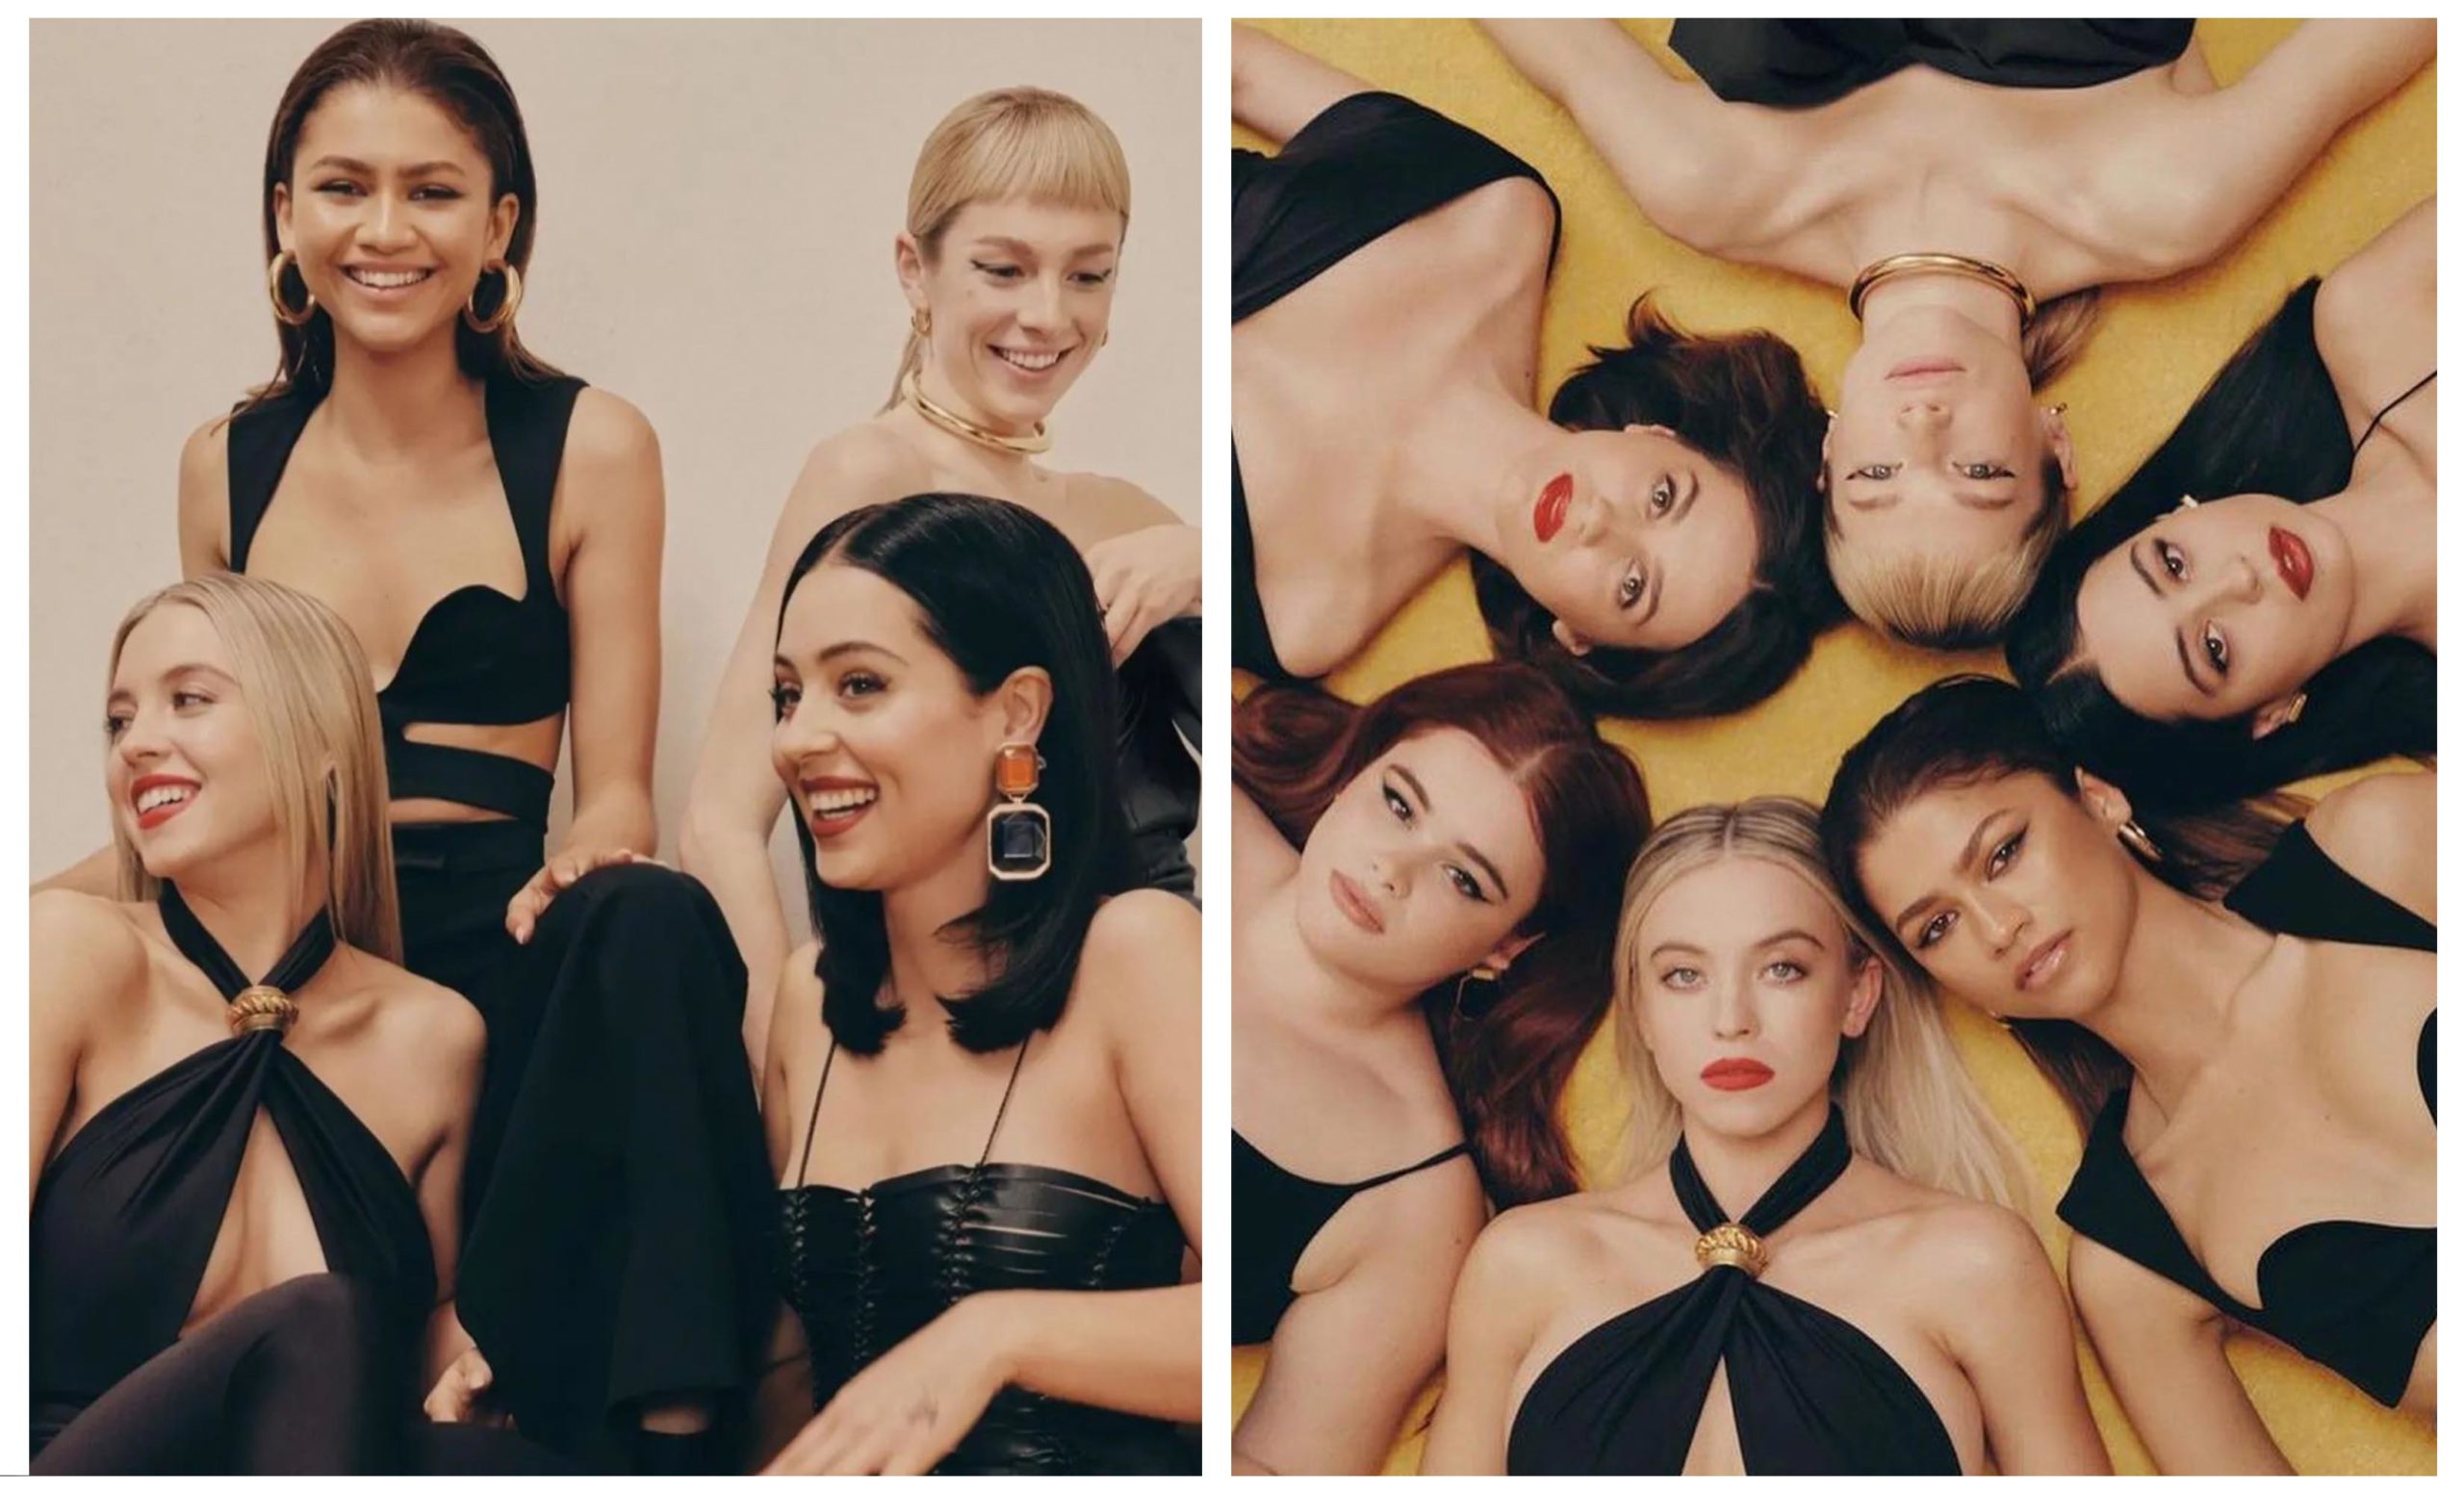 The Girls Of ‘Euphoria’ Make The Cut’s February Cover Edgier As They Spill Some Tea About The Ending Of Season 2